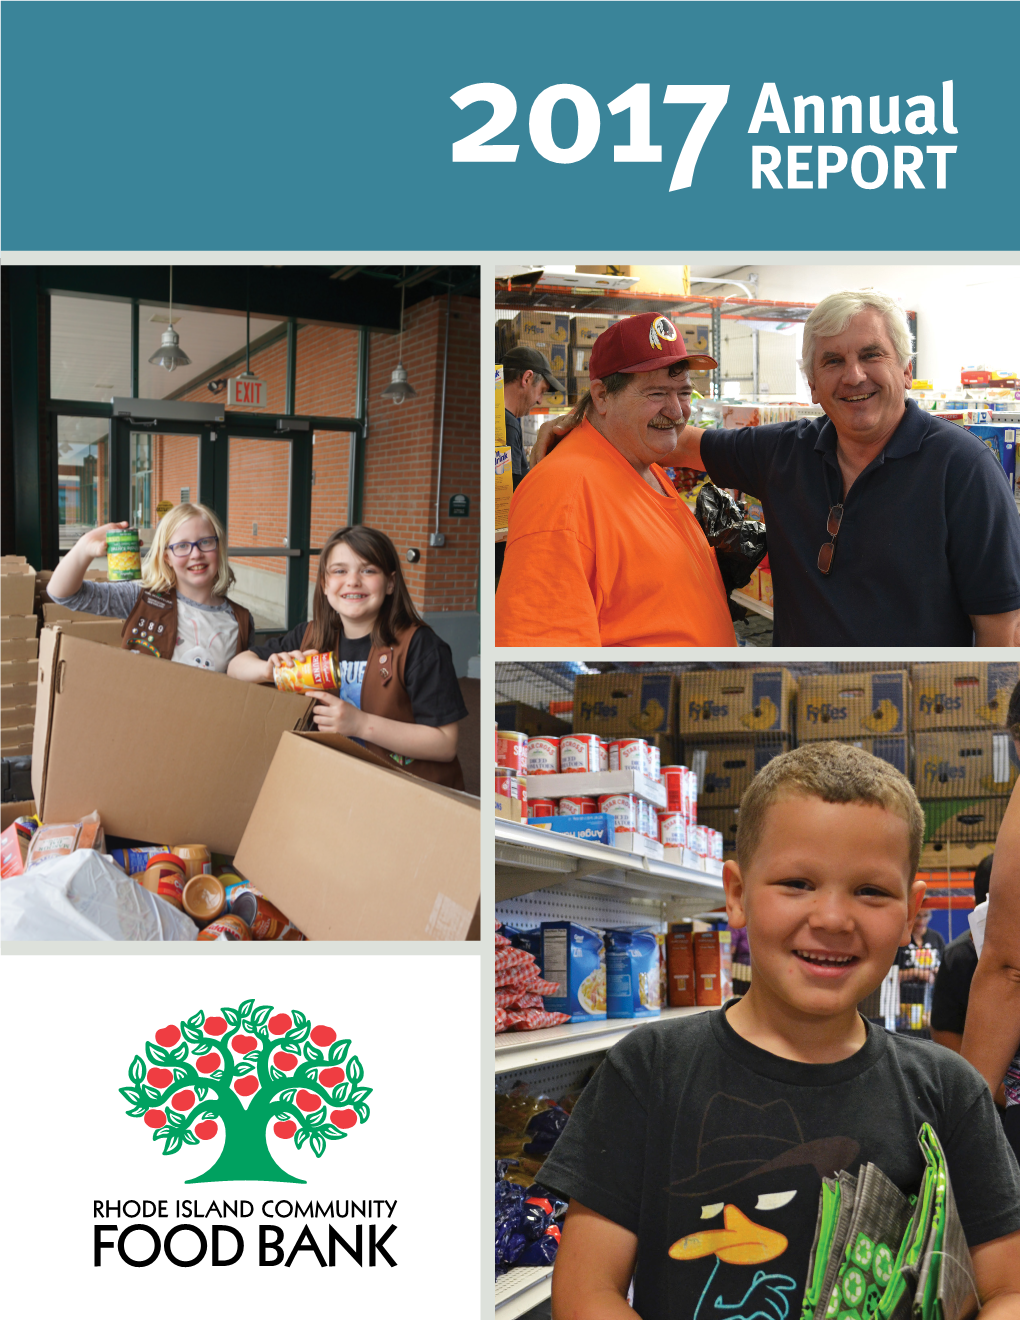 2017 Annual Report for the Rhode Island Community Food Bank